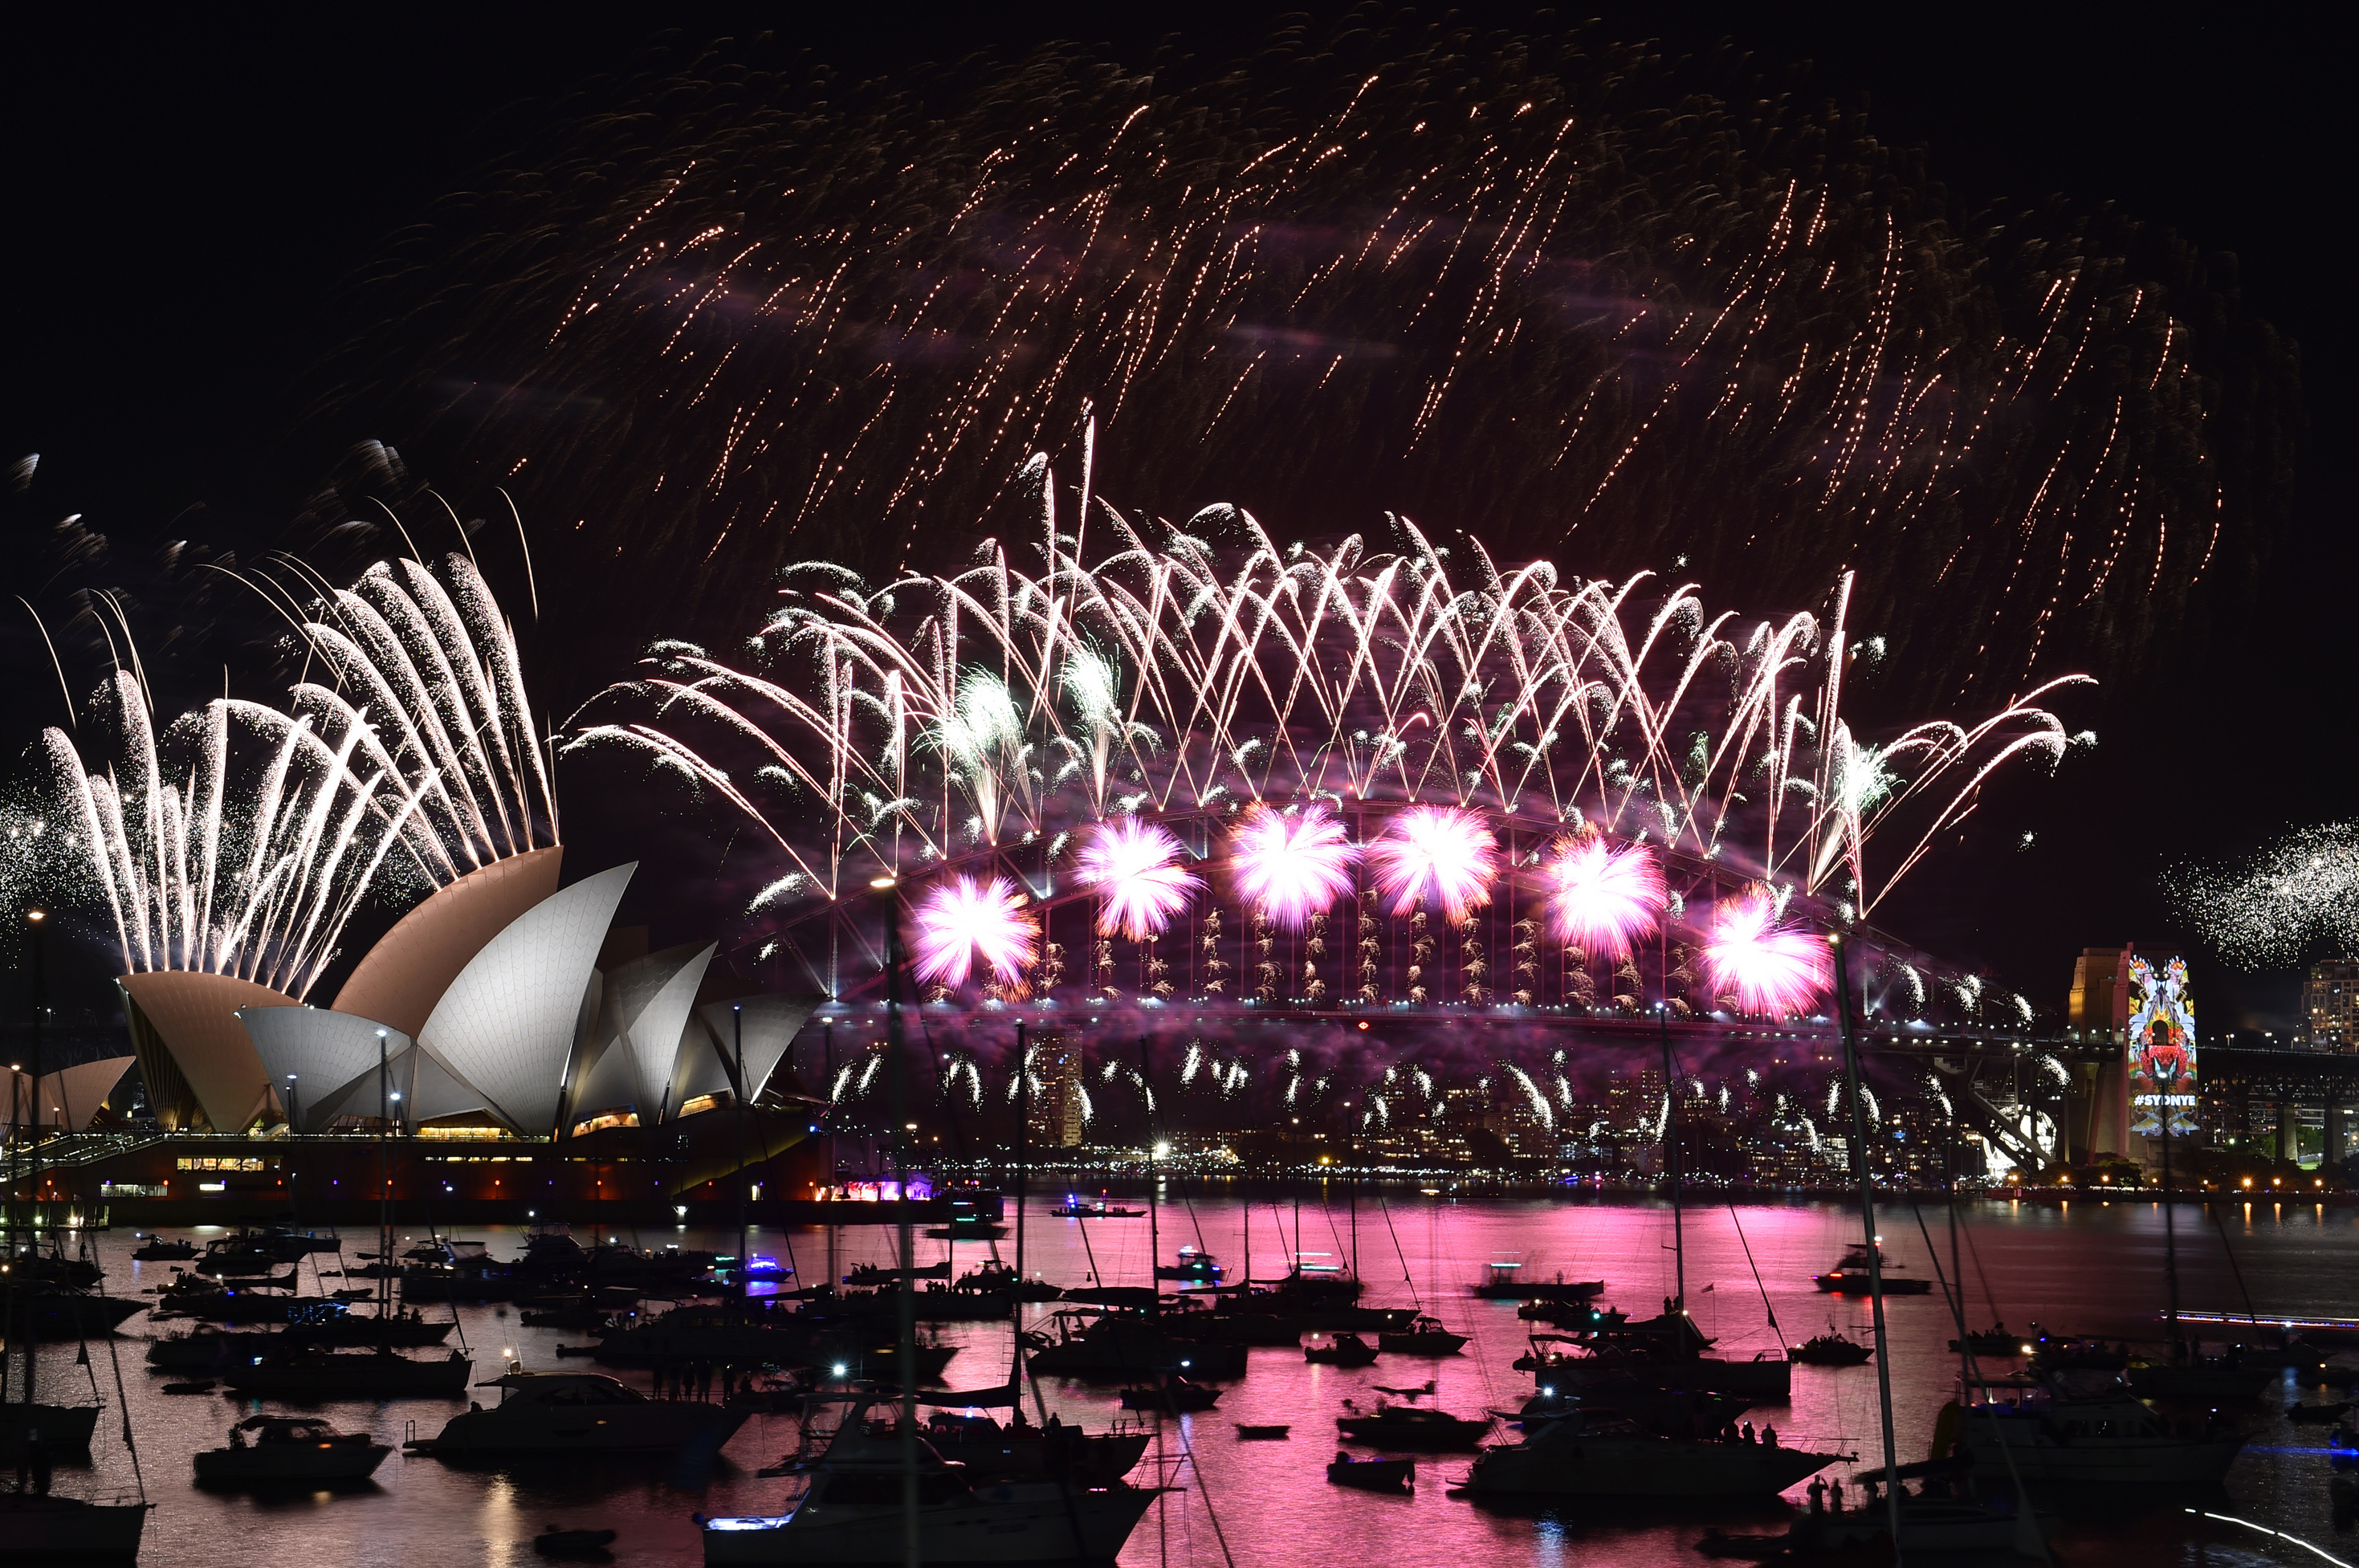 Fireworks light up the sky over Sydney's Opera House (L) and Harbour Bridge during New Year celebrations in Sydney on January 1, 2016.  AFP PHOTO / Saeed KHAN / AFP PHOTO / SAEED KHAN